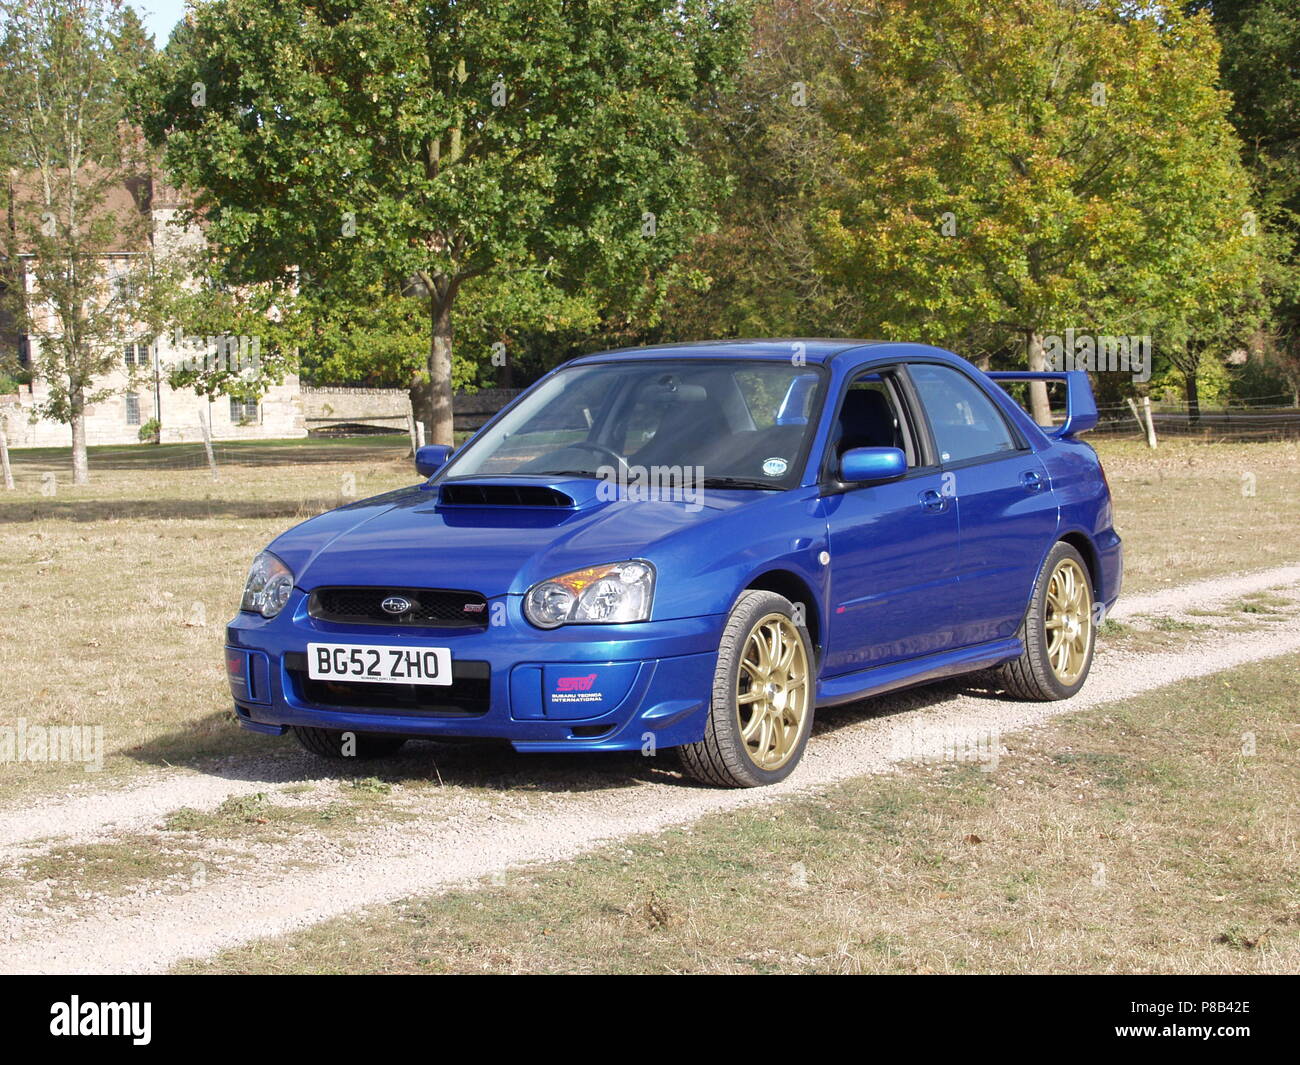 Subaru Impreza WRX STI in WR blue pearl colour with alloy wheels - showing front and side view Stock Photo